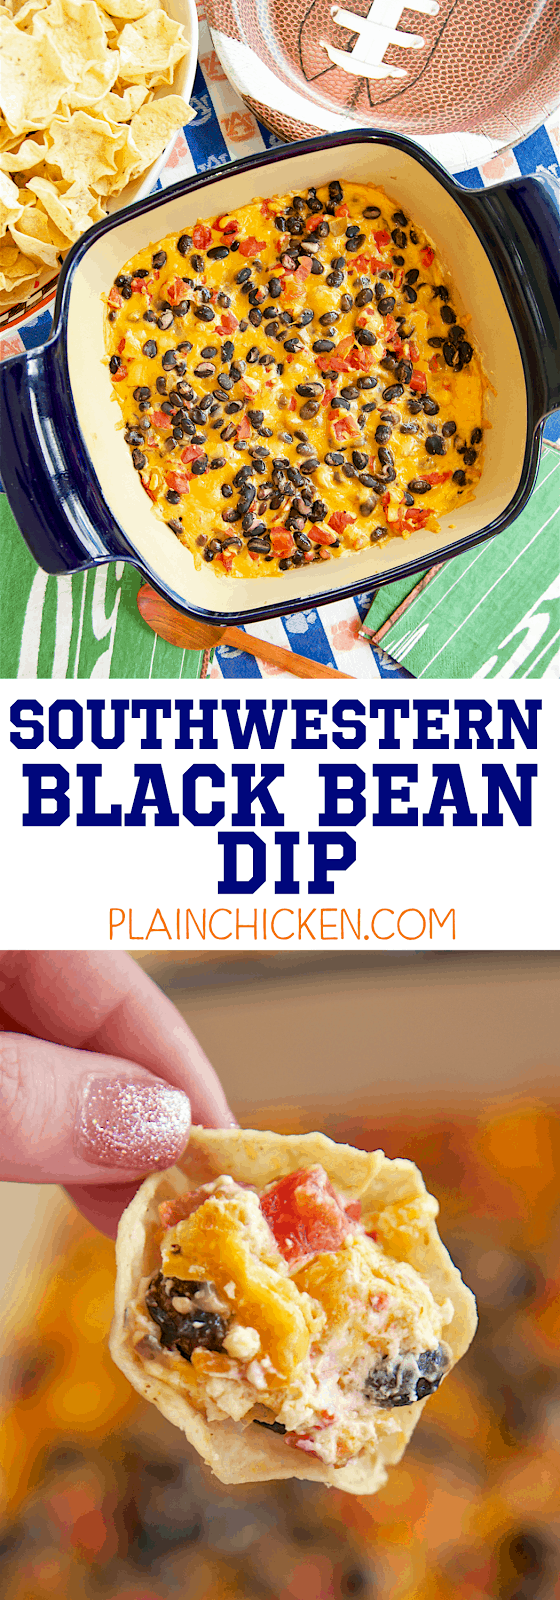 Southwestern Black Bean Dip - CRAZY good! Only 5 ingredients! Cream cheese, taco seasoning, diced tomatoes and green chiles, black beans and cheddar cheese. Always the first thing to go! Can assemble ahead of time and bake when ready to eat. Everyone always asks for the recipe!